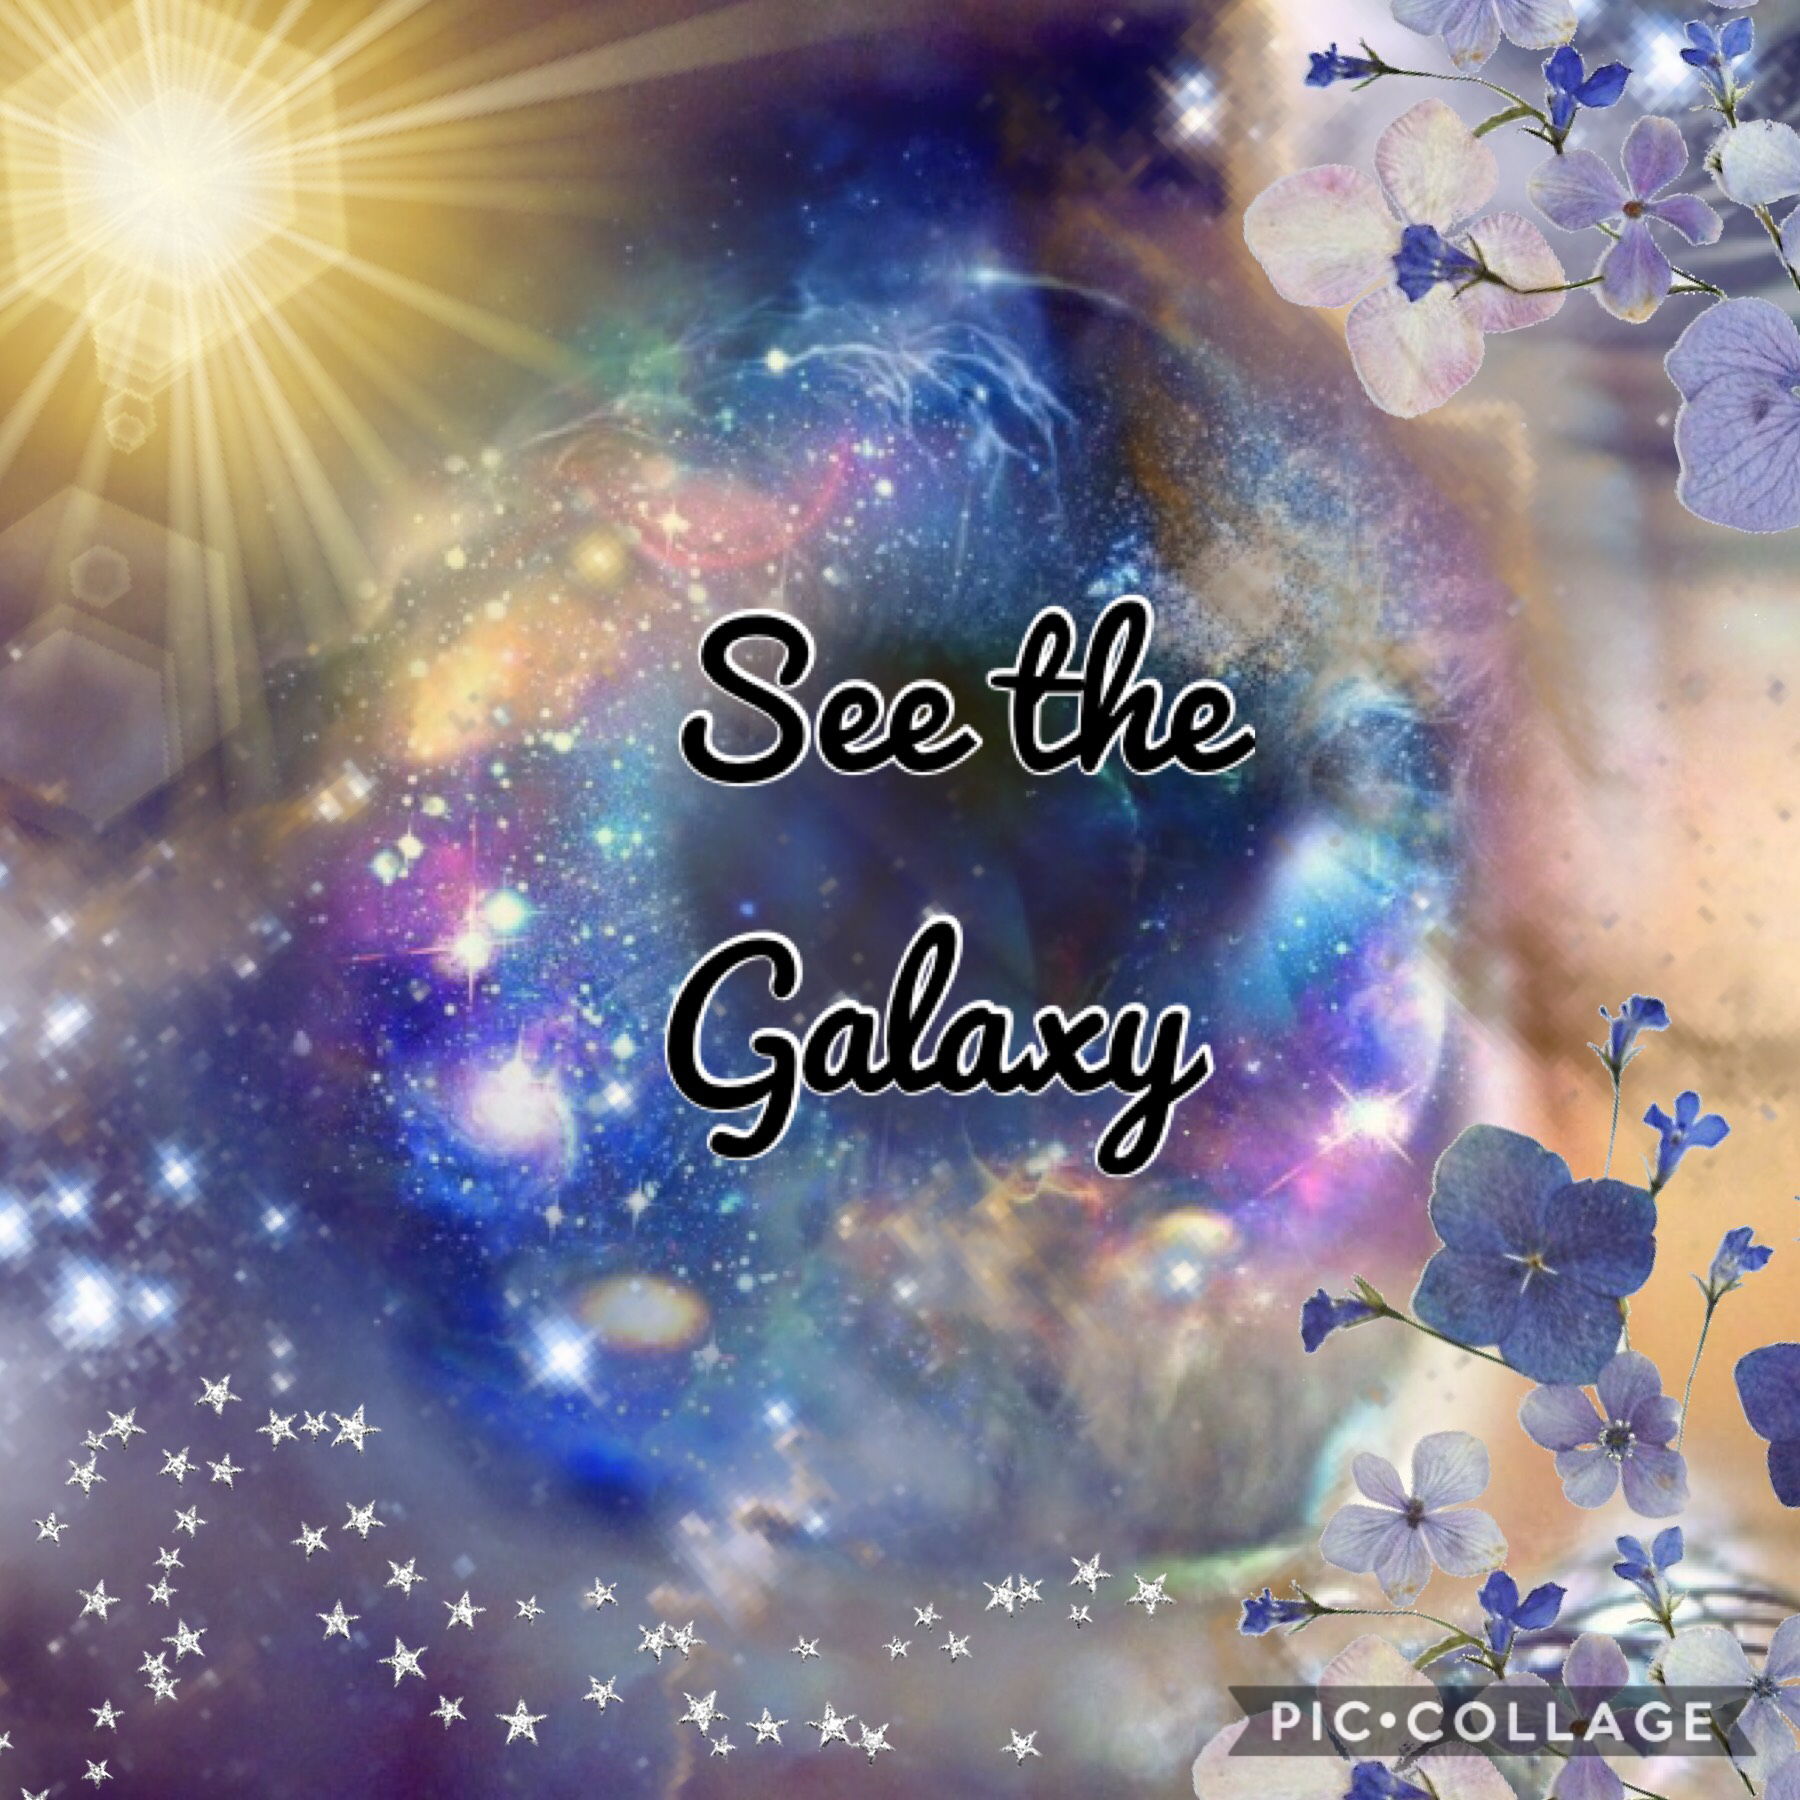 See the Galaxy! 🌌